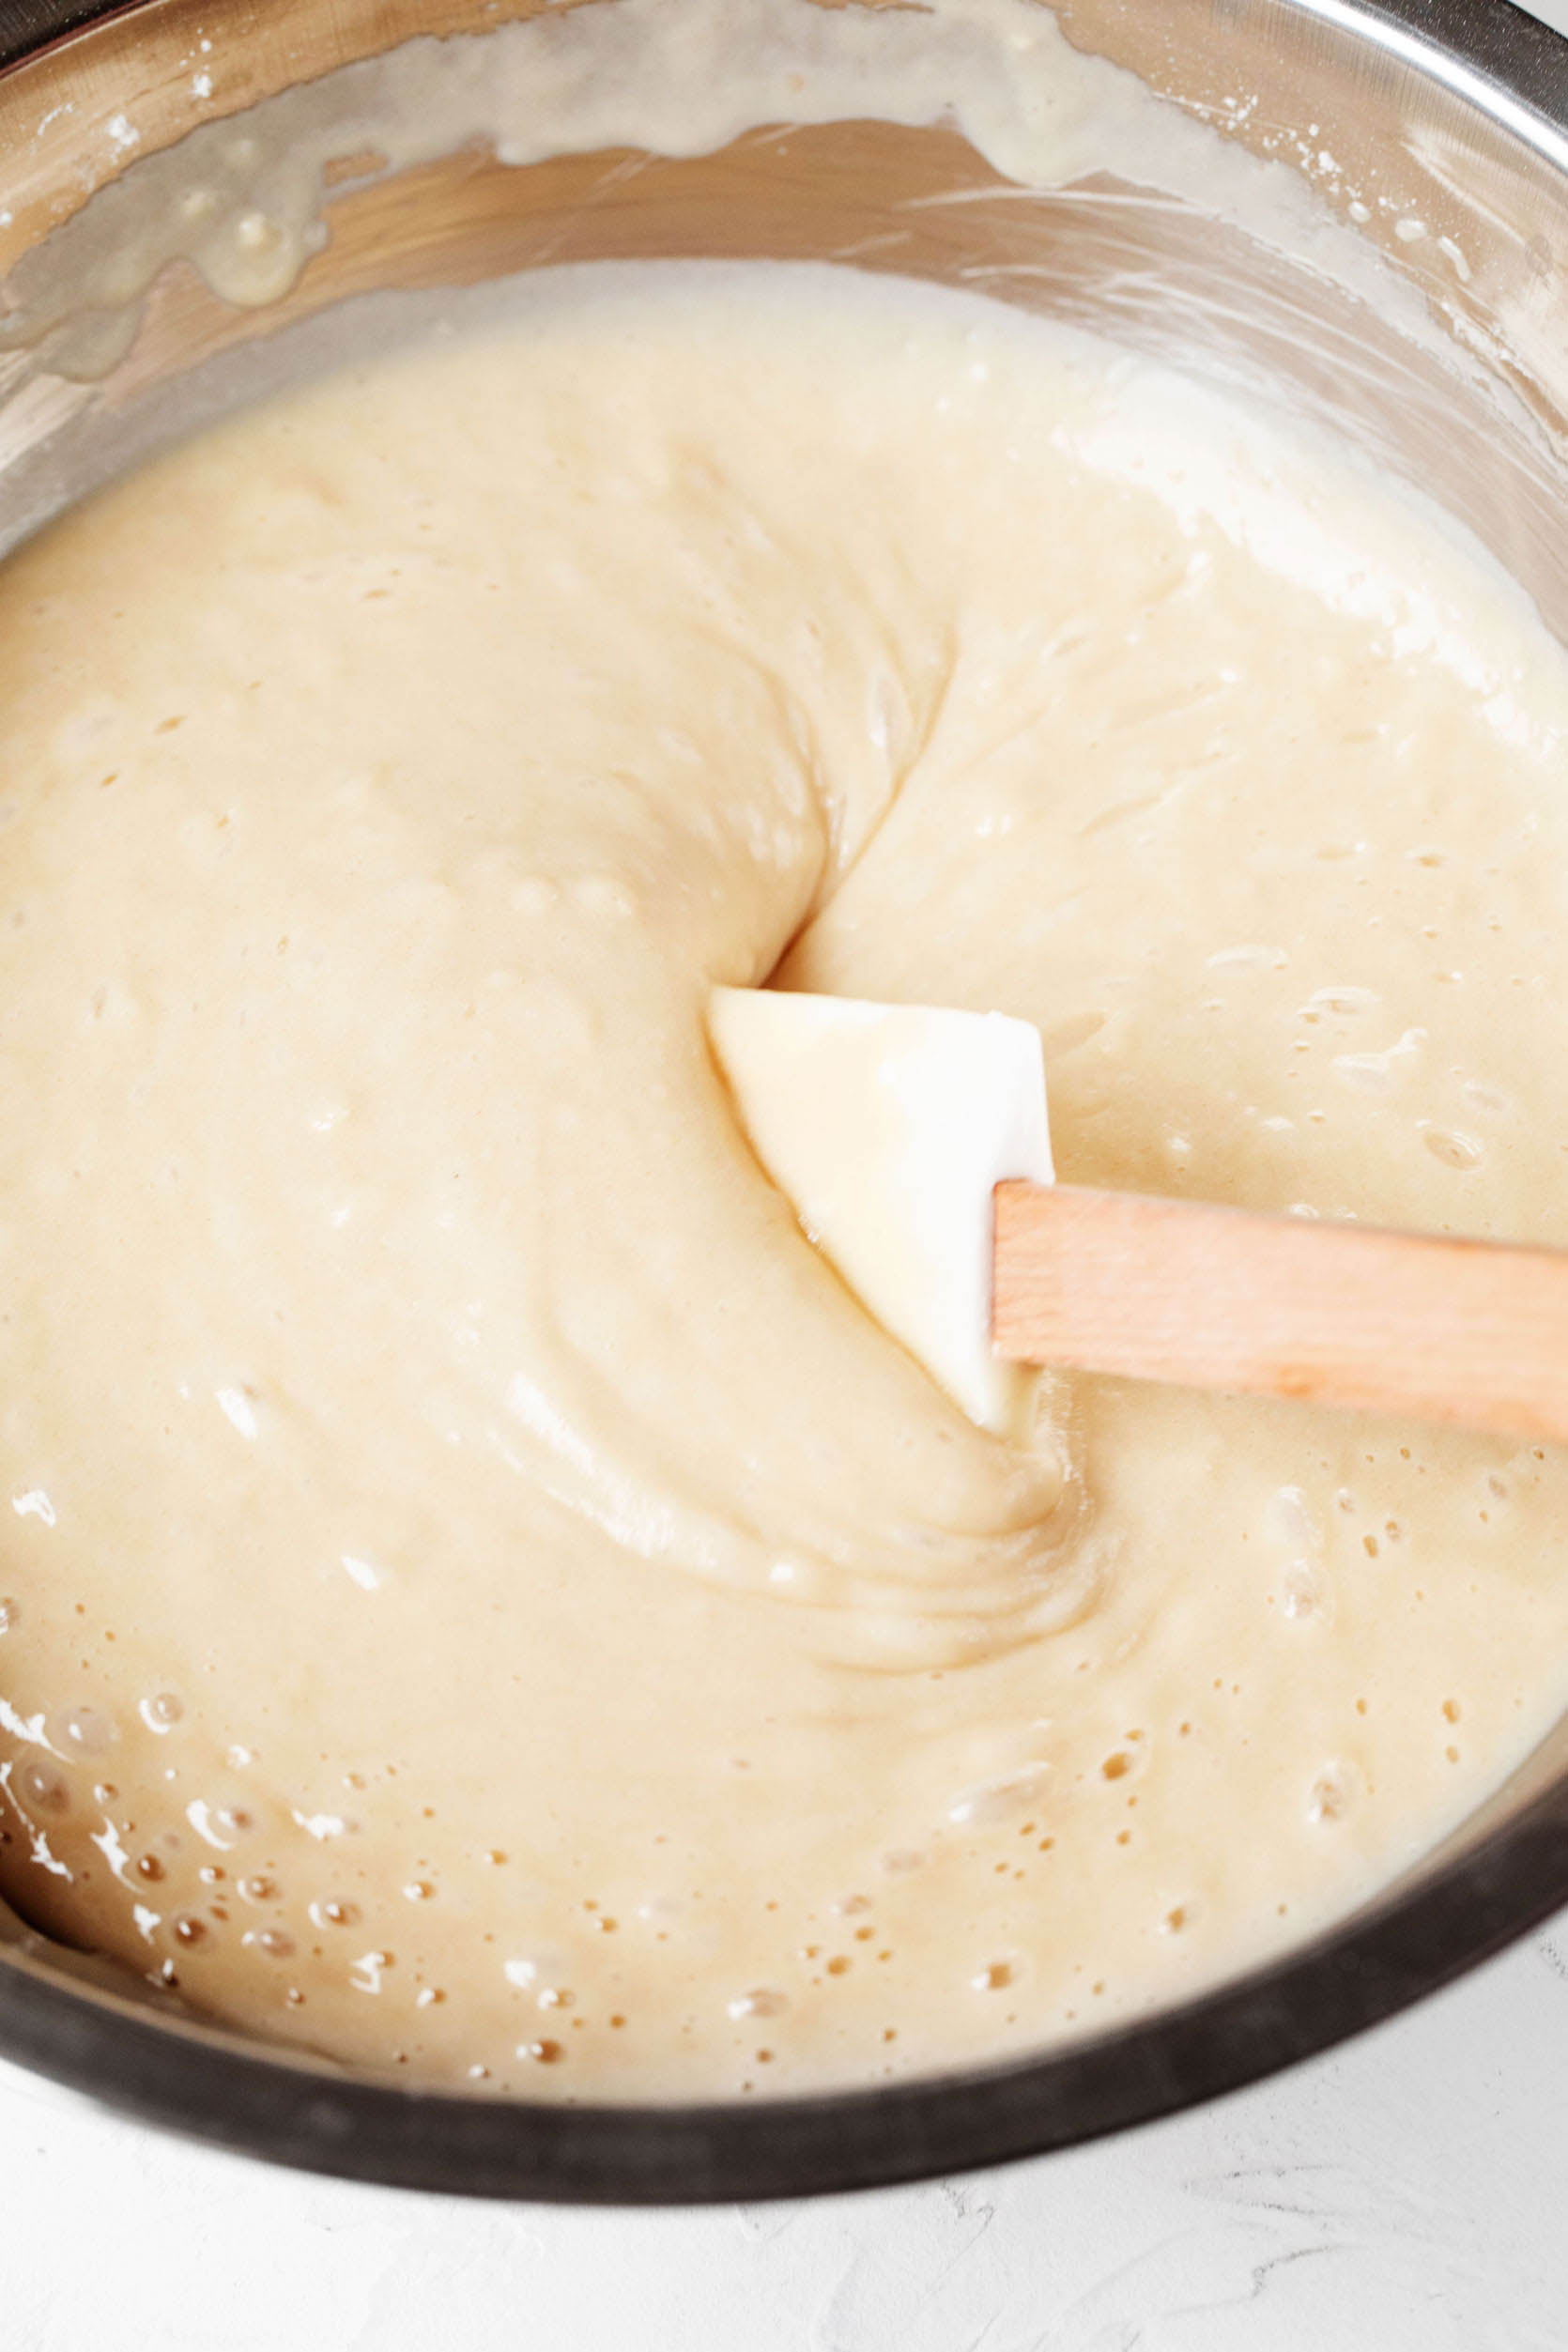 A mixing bowl has been filled with vanilla cake batter, which is being stirred with a spatula.